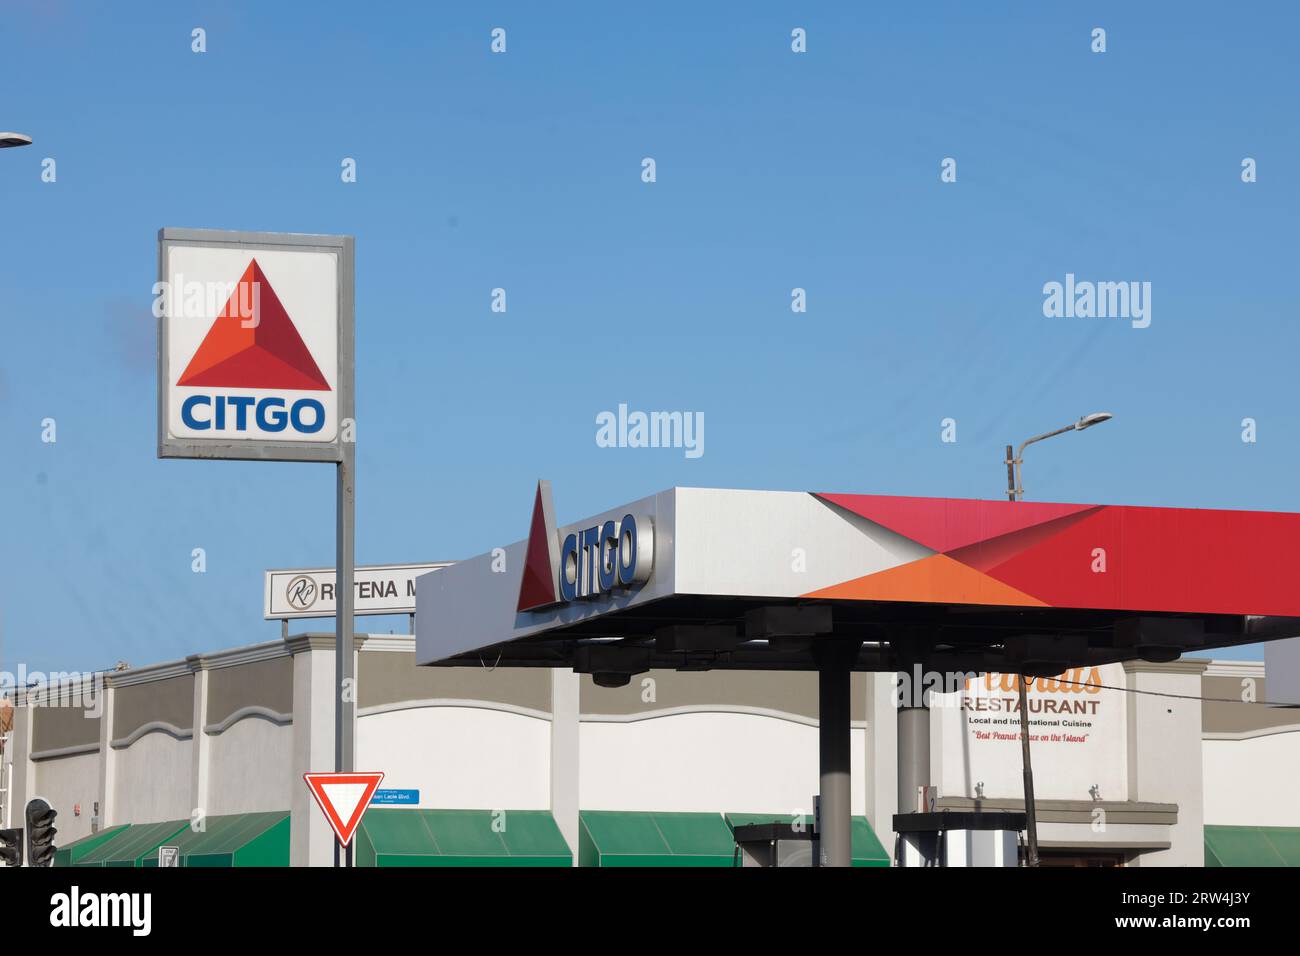 A Citgo gas station in Charlotte, North Carolina. Citgo Petroleum Corporation is a refiner and marketer of transportation fuels, lubricants, Stock Photo